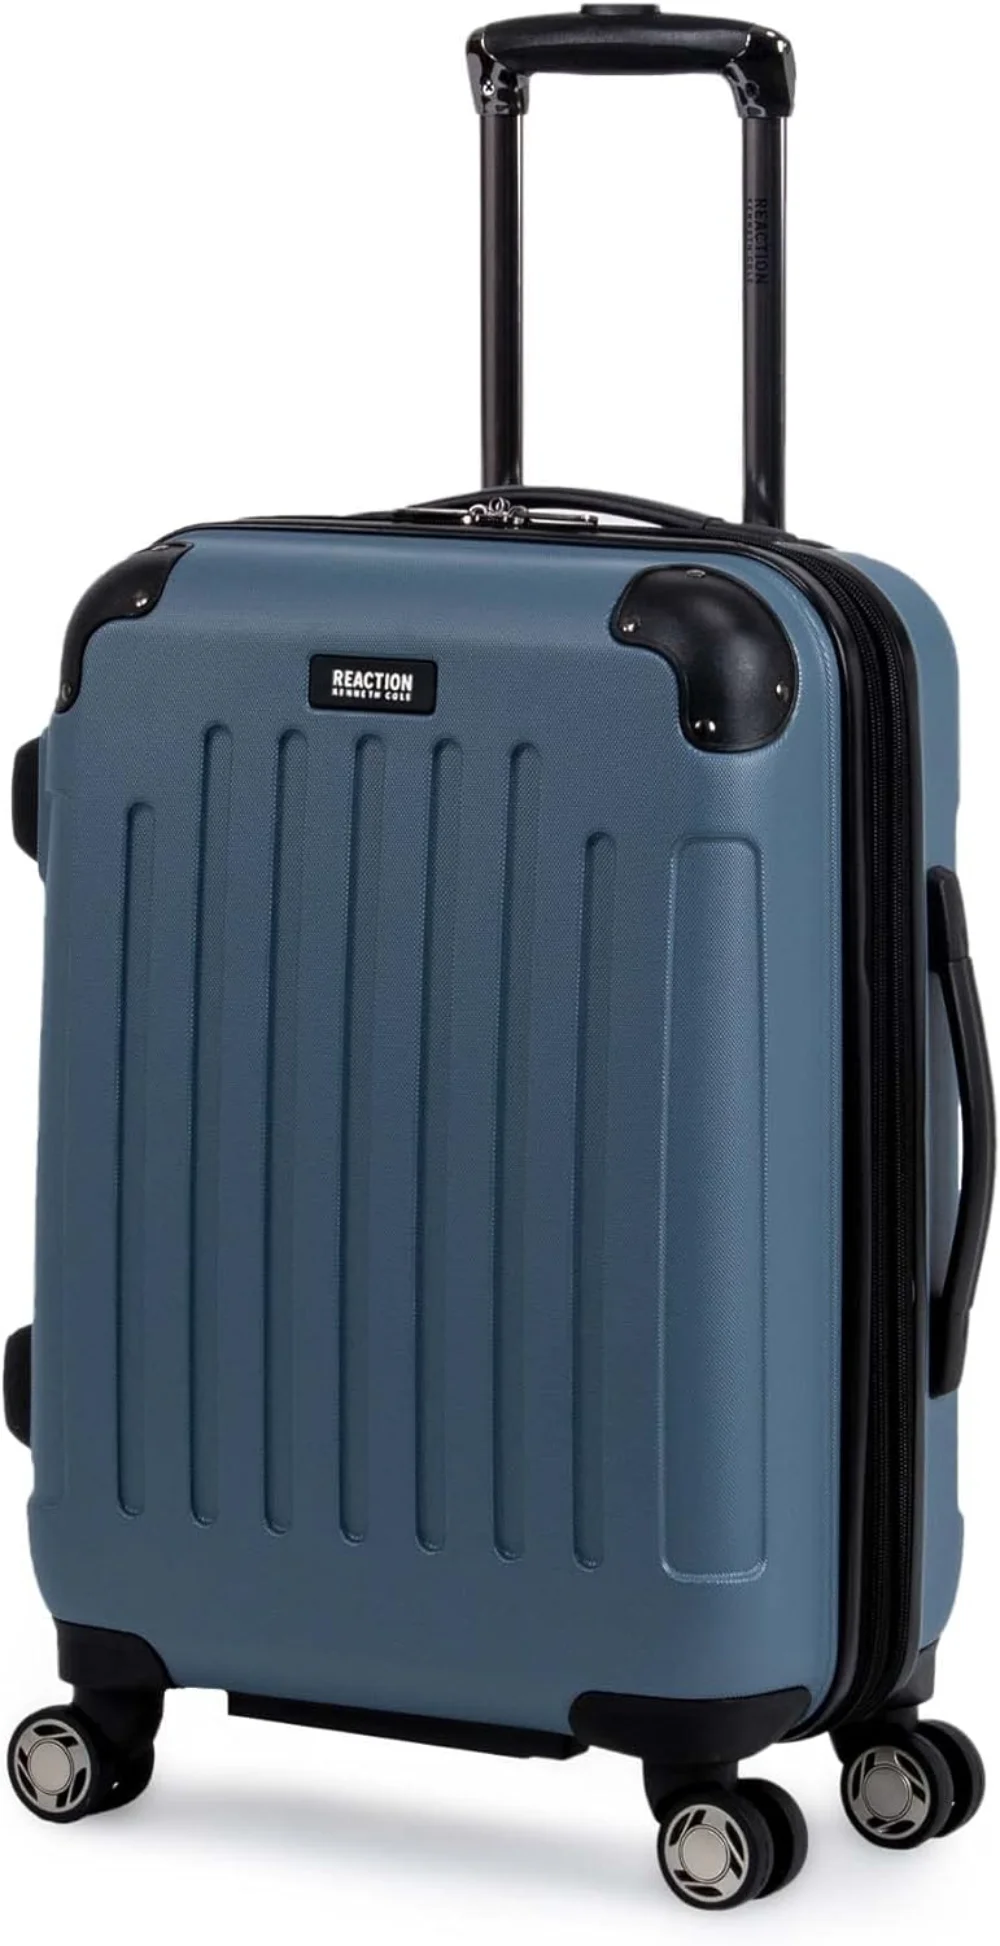 

Kenneth Cole REACTION Renegade Luggage Expandable 8-Wheel Spinner Lightweight Hardside Suitcase, Granite Blue, 20-Inch Carry On